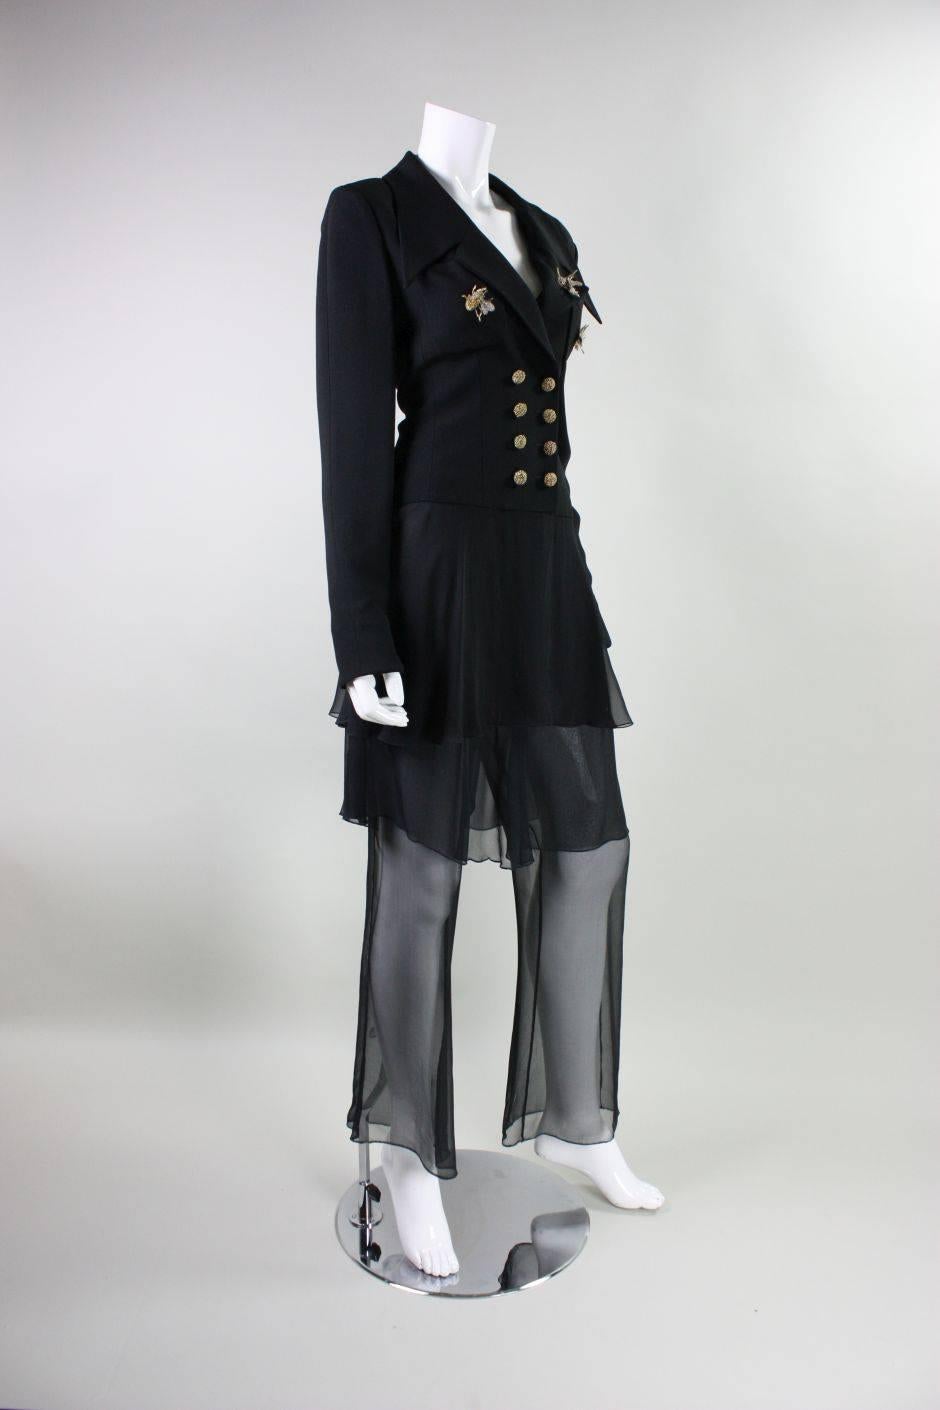 Black 1990's Karl Lagerfeld Chiffon Ensemble with Insect Embellishments For Sale